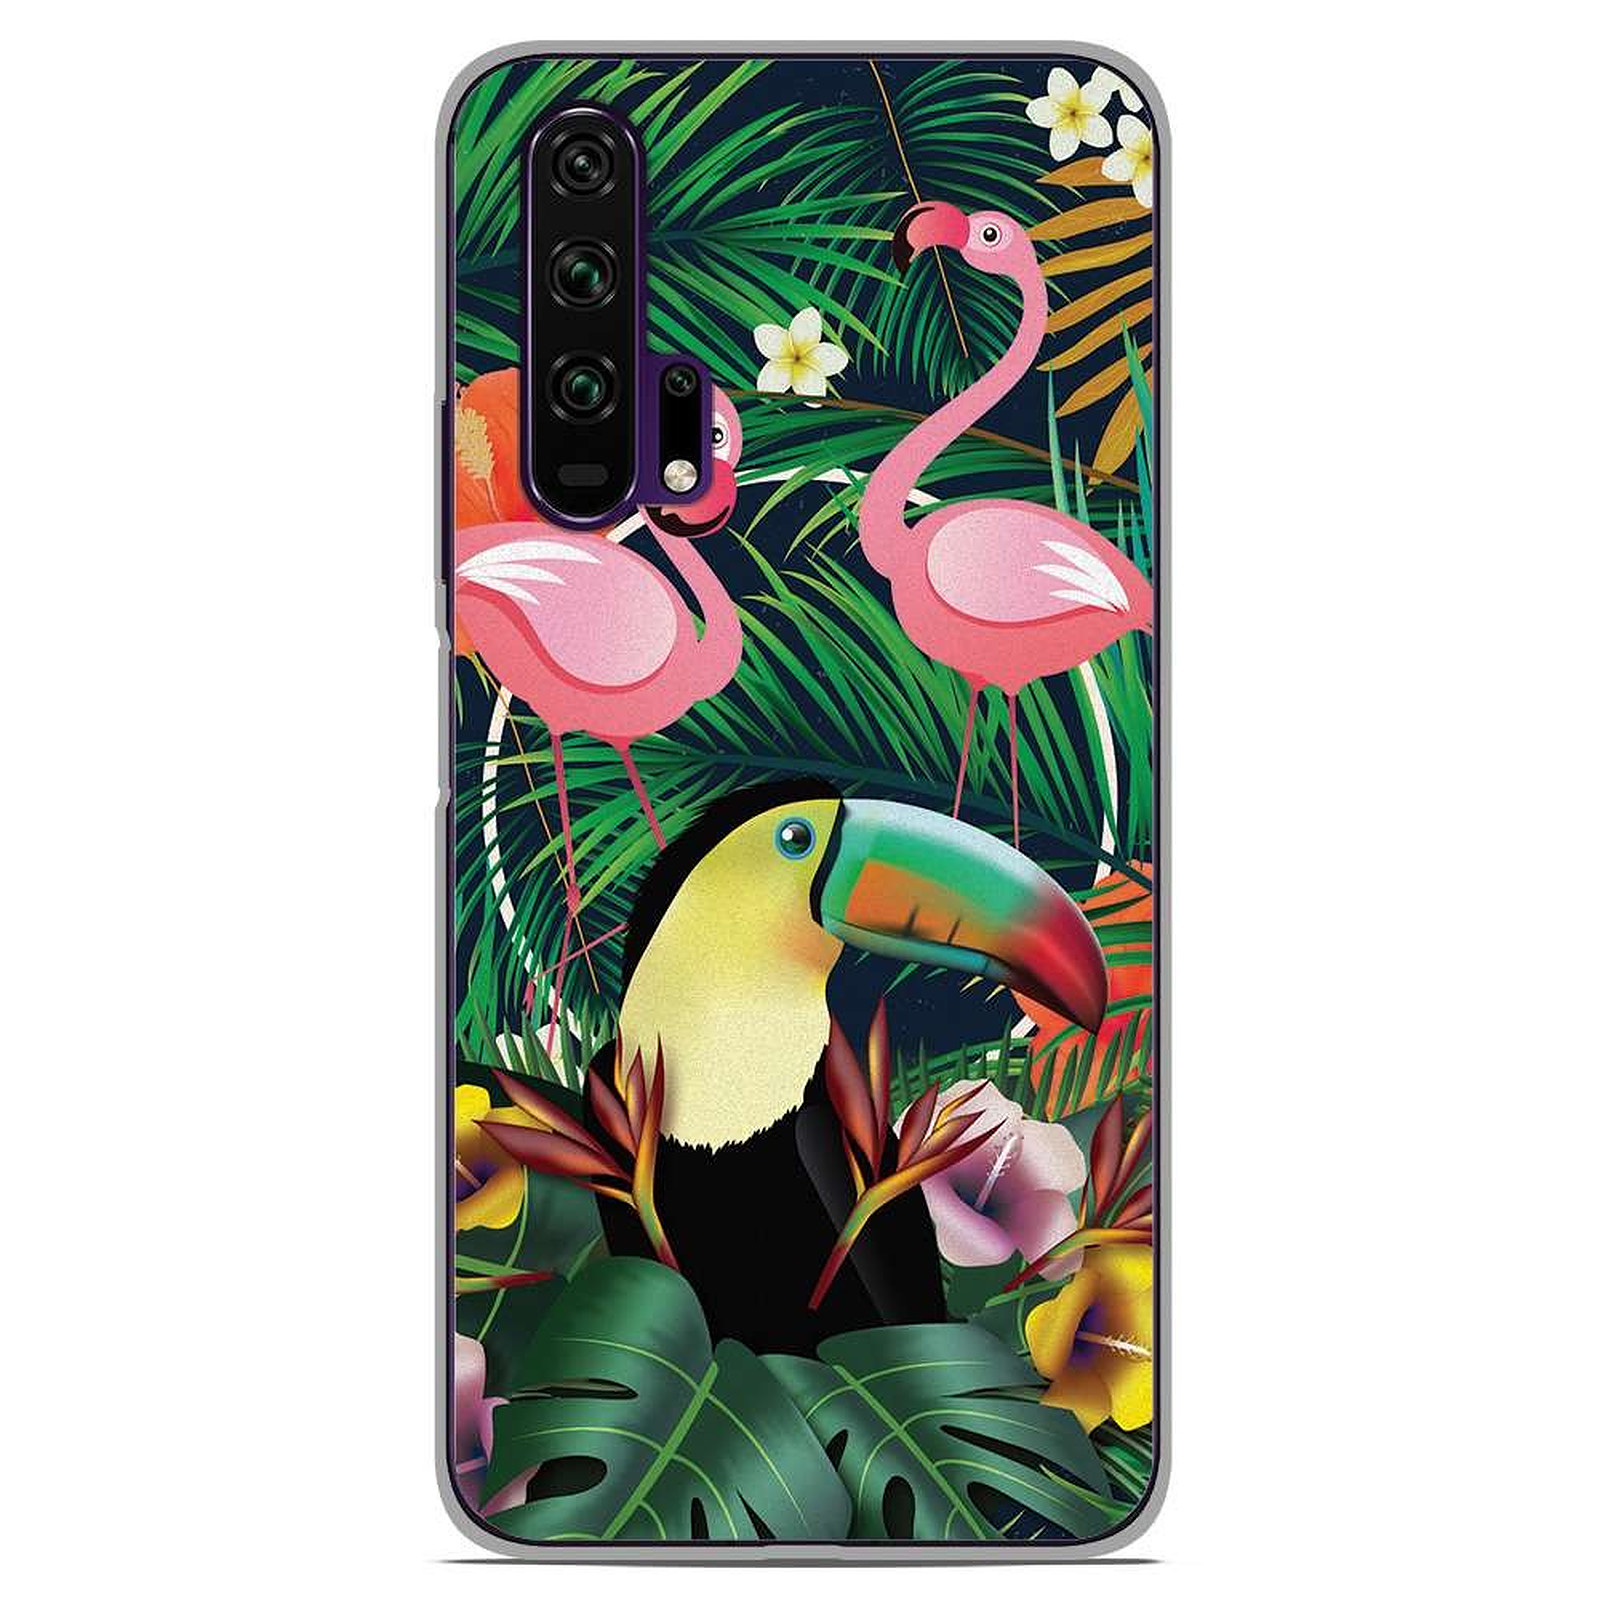 1001 Coques Coque silicone gel Huawei Honor 20 Pro motif Tropical Toucan - Coque telephone 1001Coques